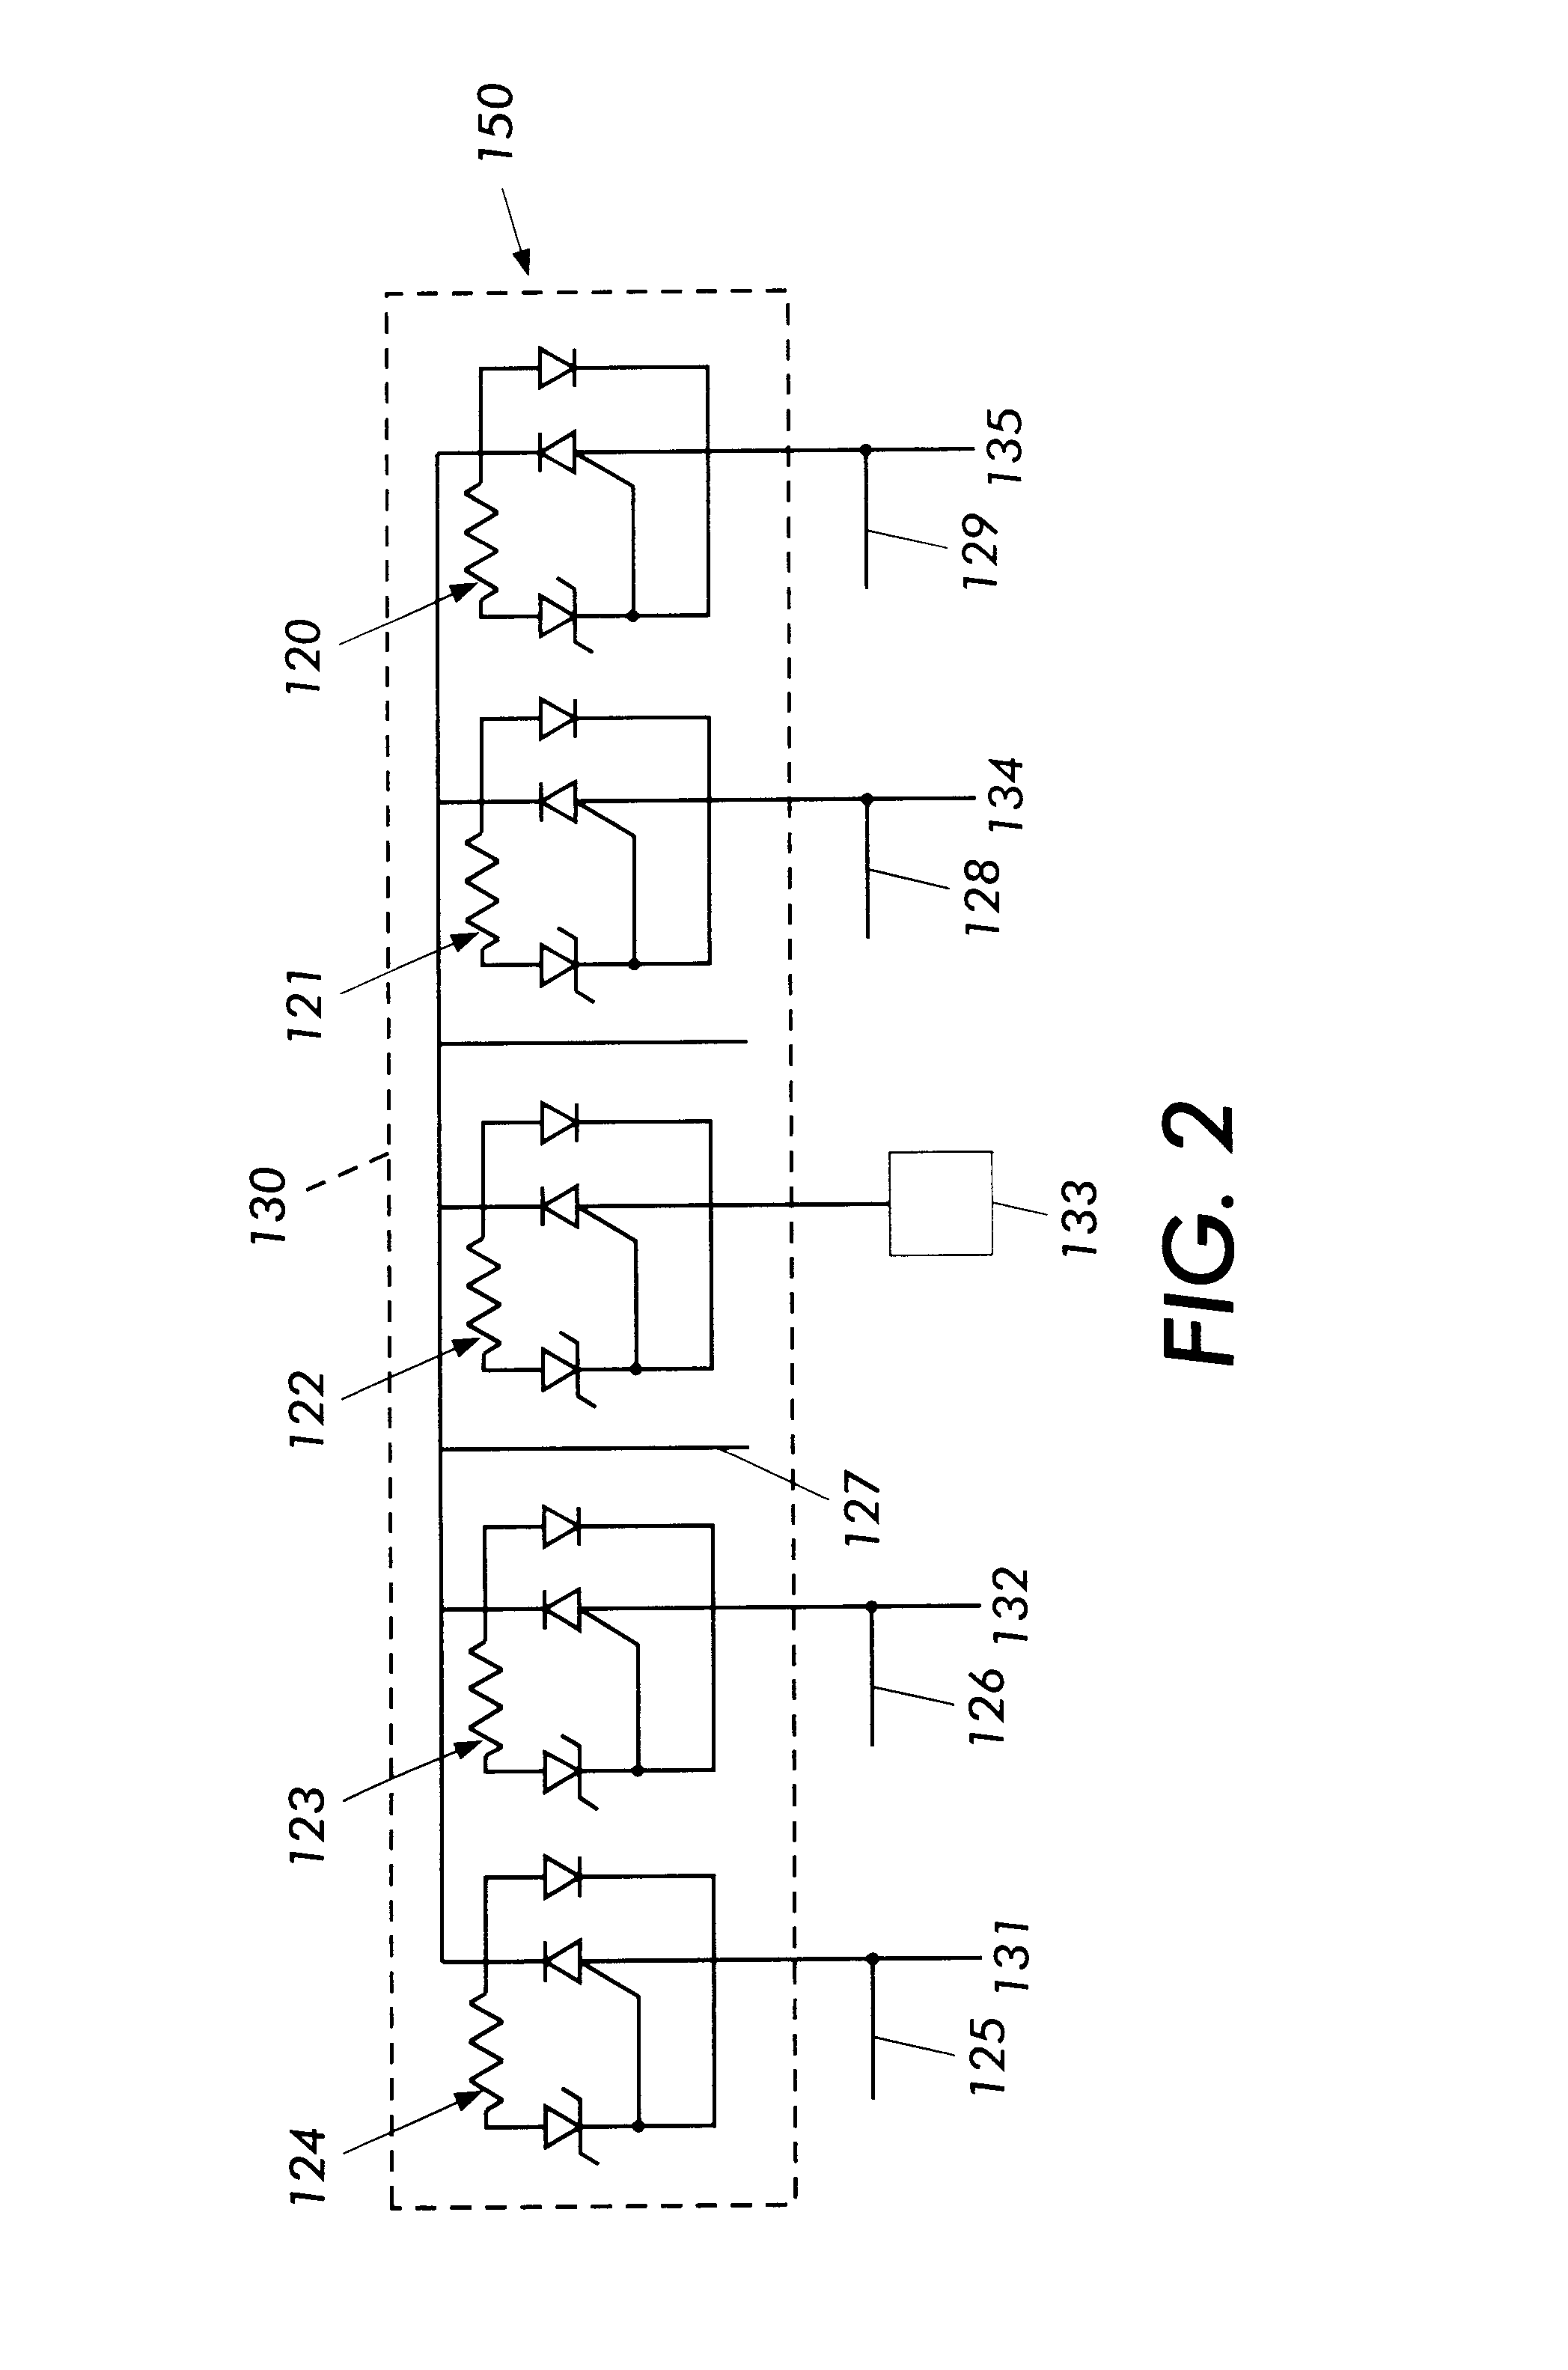 Electromagnetic radiation immune medical assist device adapter